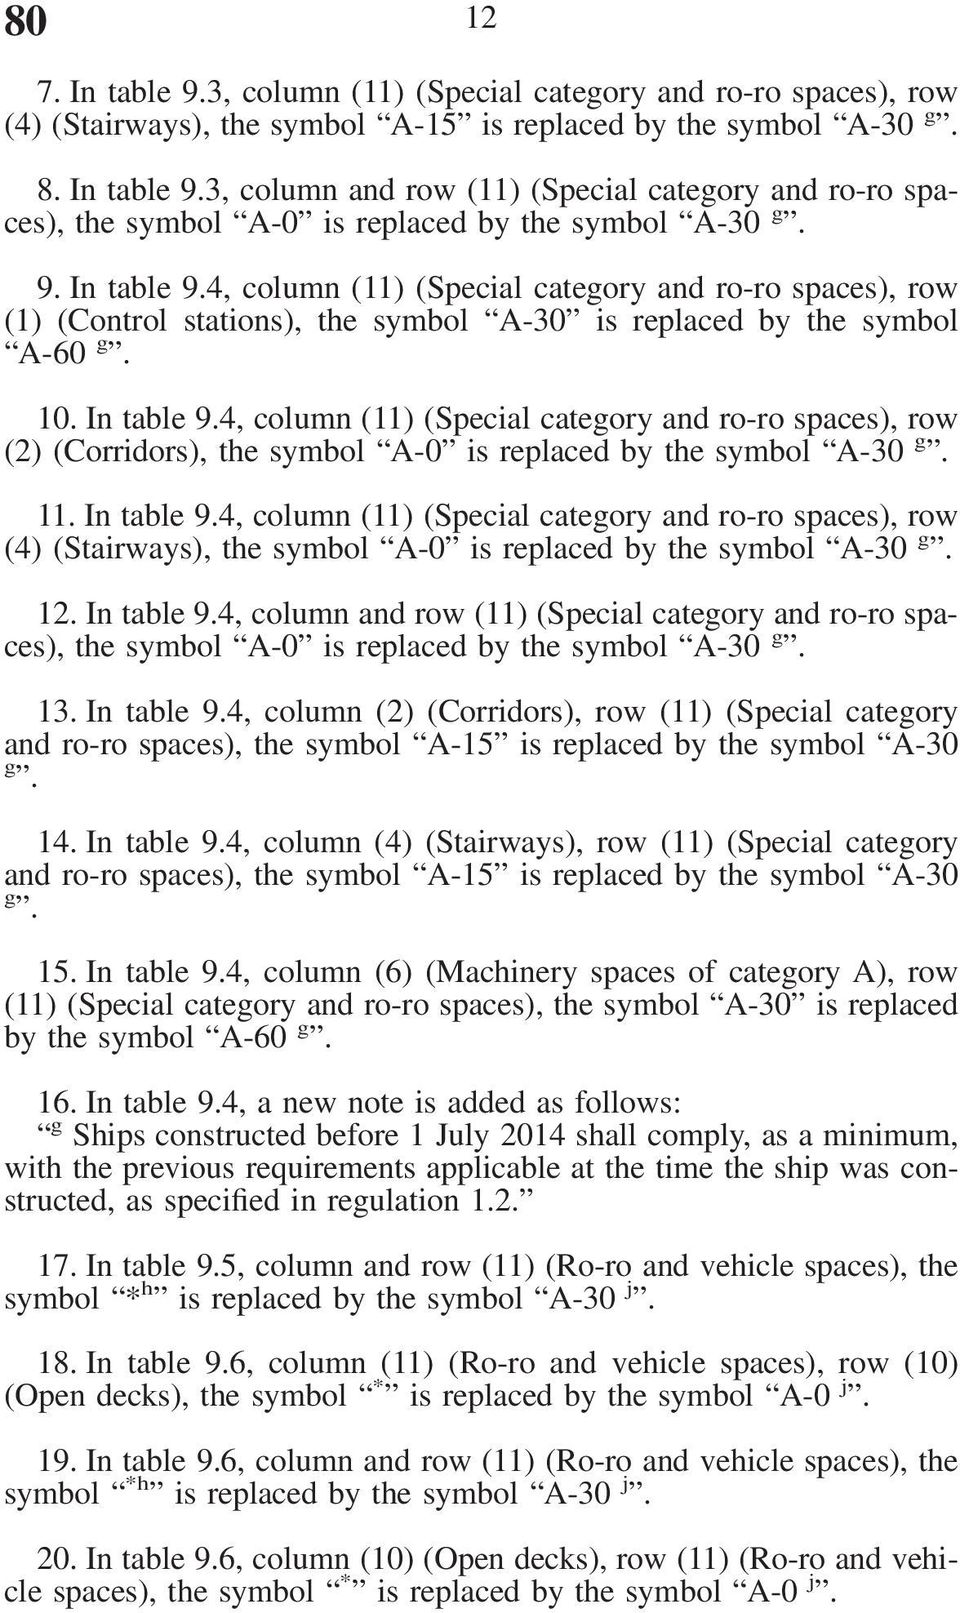 11. In table 9.4, column (11) (Special category and ro-ro spaces), row (4) (Stairways), the symbol A-0 is replaced by the symbol A-30 g. 12. In table 9.4, column and row (11) (Special category and ro-ro spaces), the symbol A-0 is replaced by the symbol A-30 g.